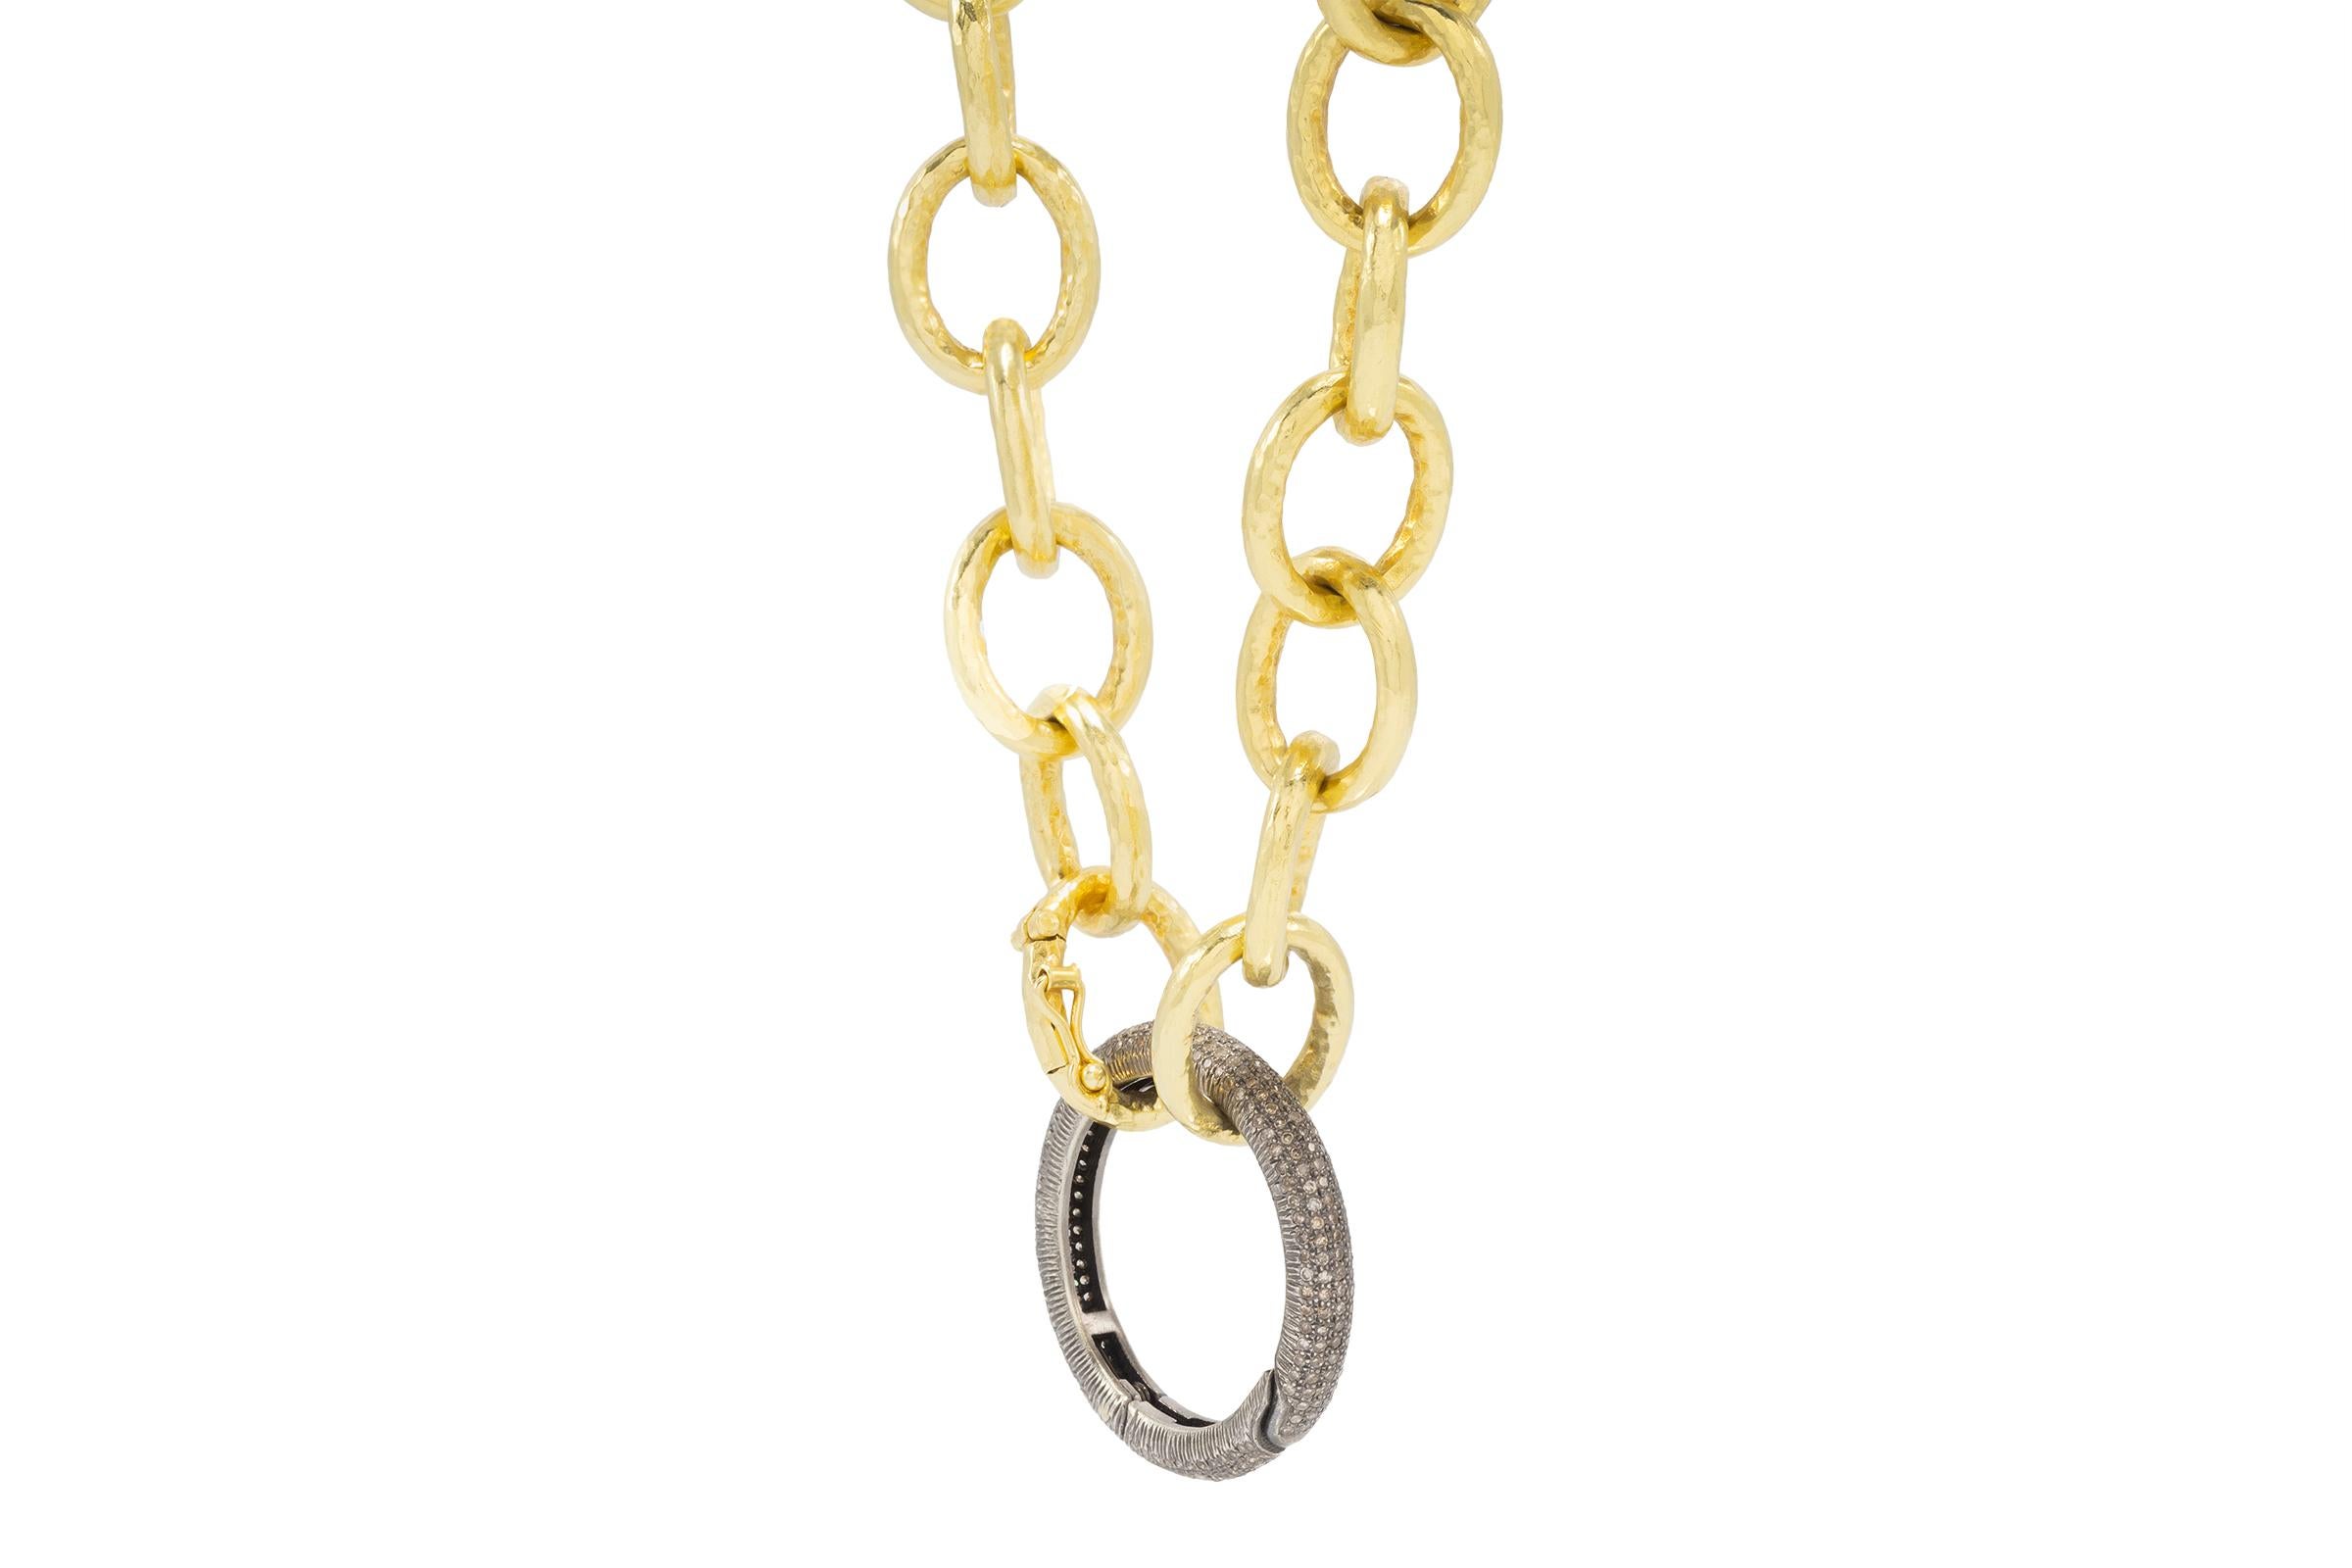 Round Cut 20k Gold Chain with Blackened Silver Diamond Clasp, by Tagili For Sale